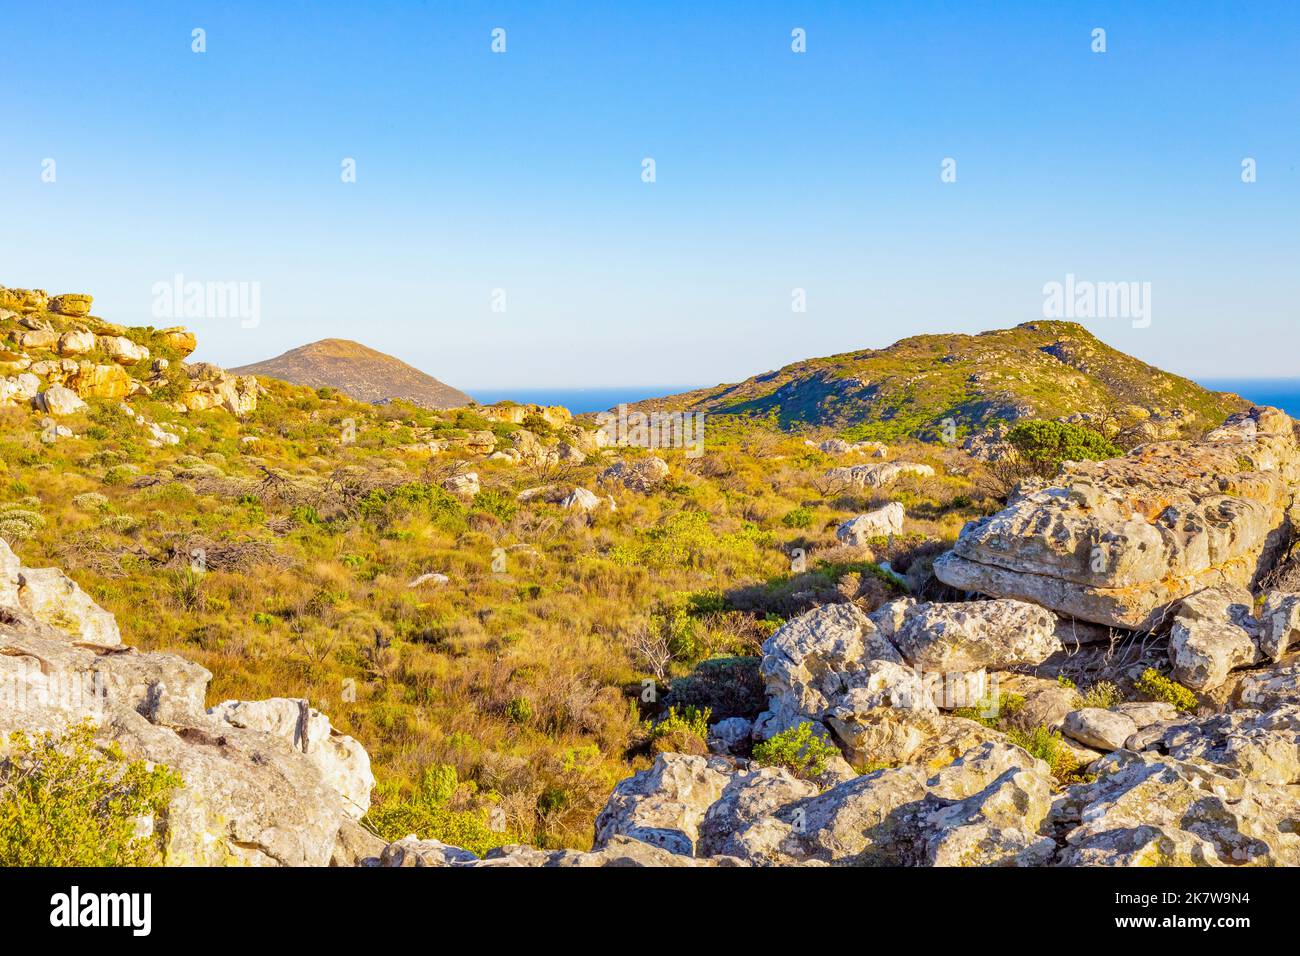 Coastal mountain landscape with fynbos flora in Cape Town, South Africa Stock Photo